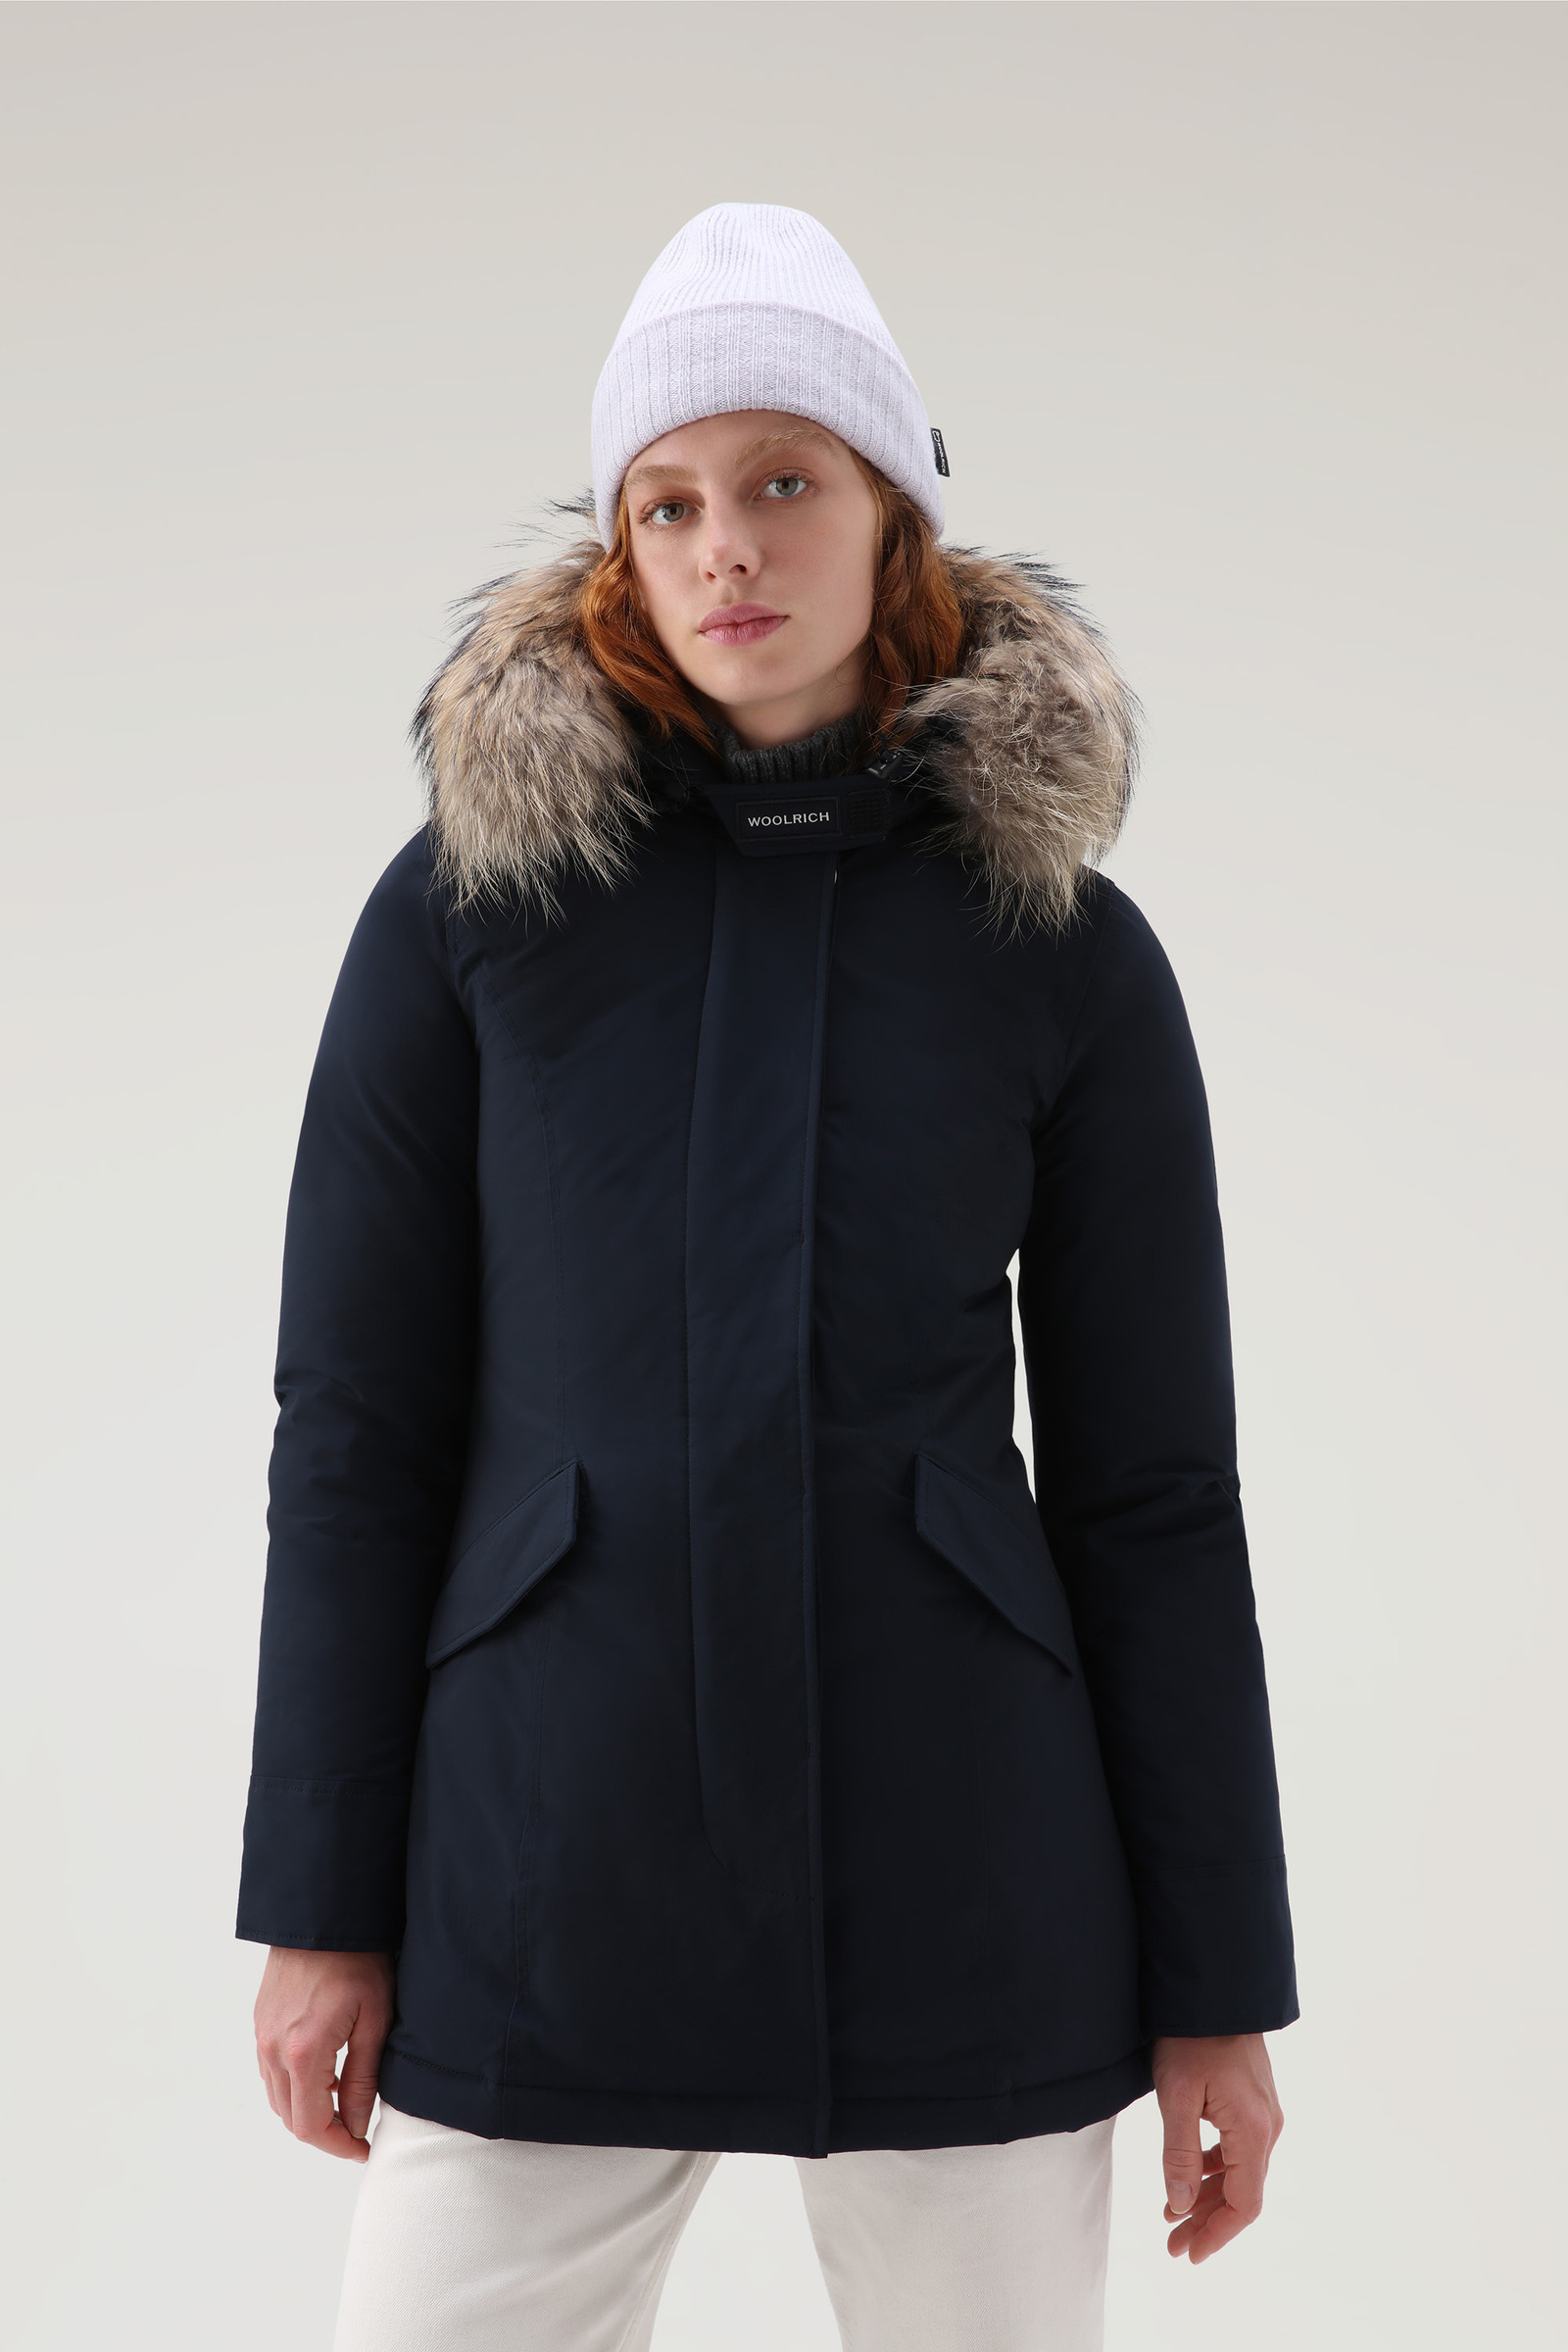 Women's Arctic Parka in Urban Touch with Detachable Fur | Woolrich USA